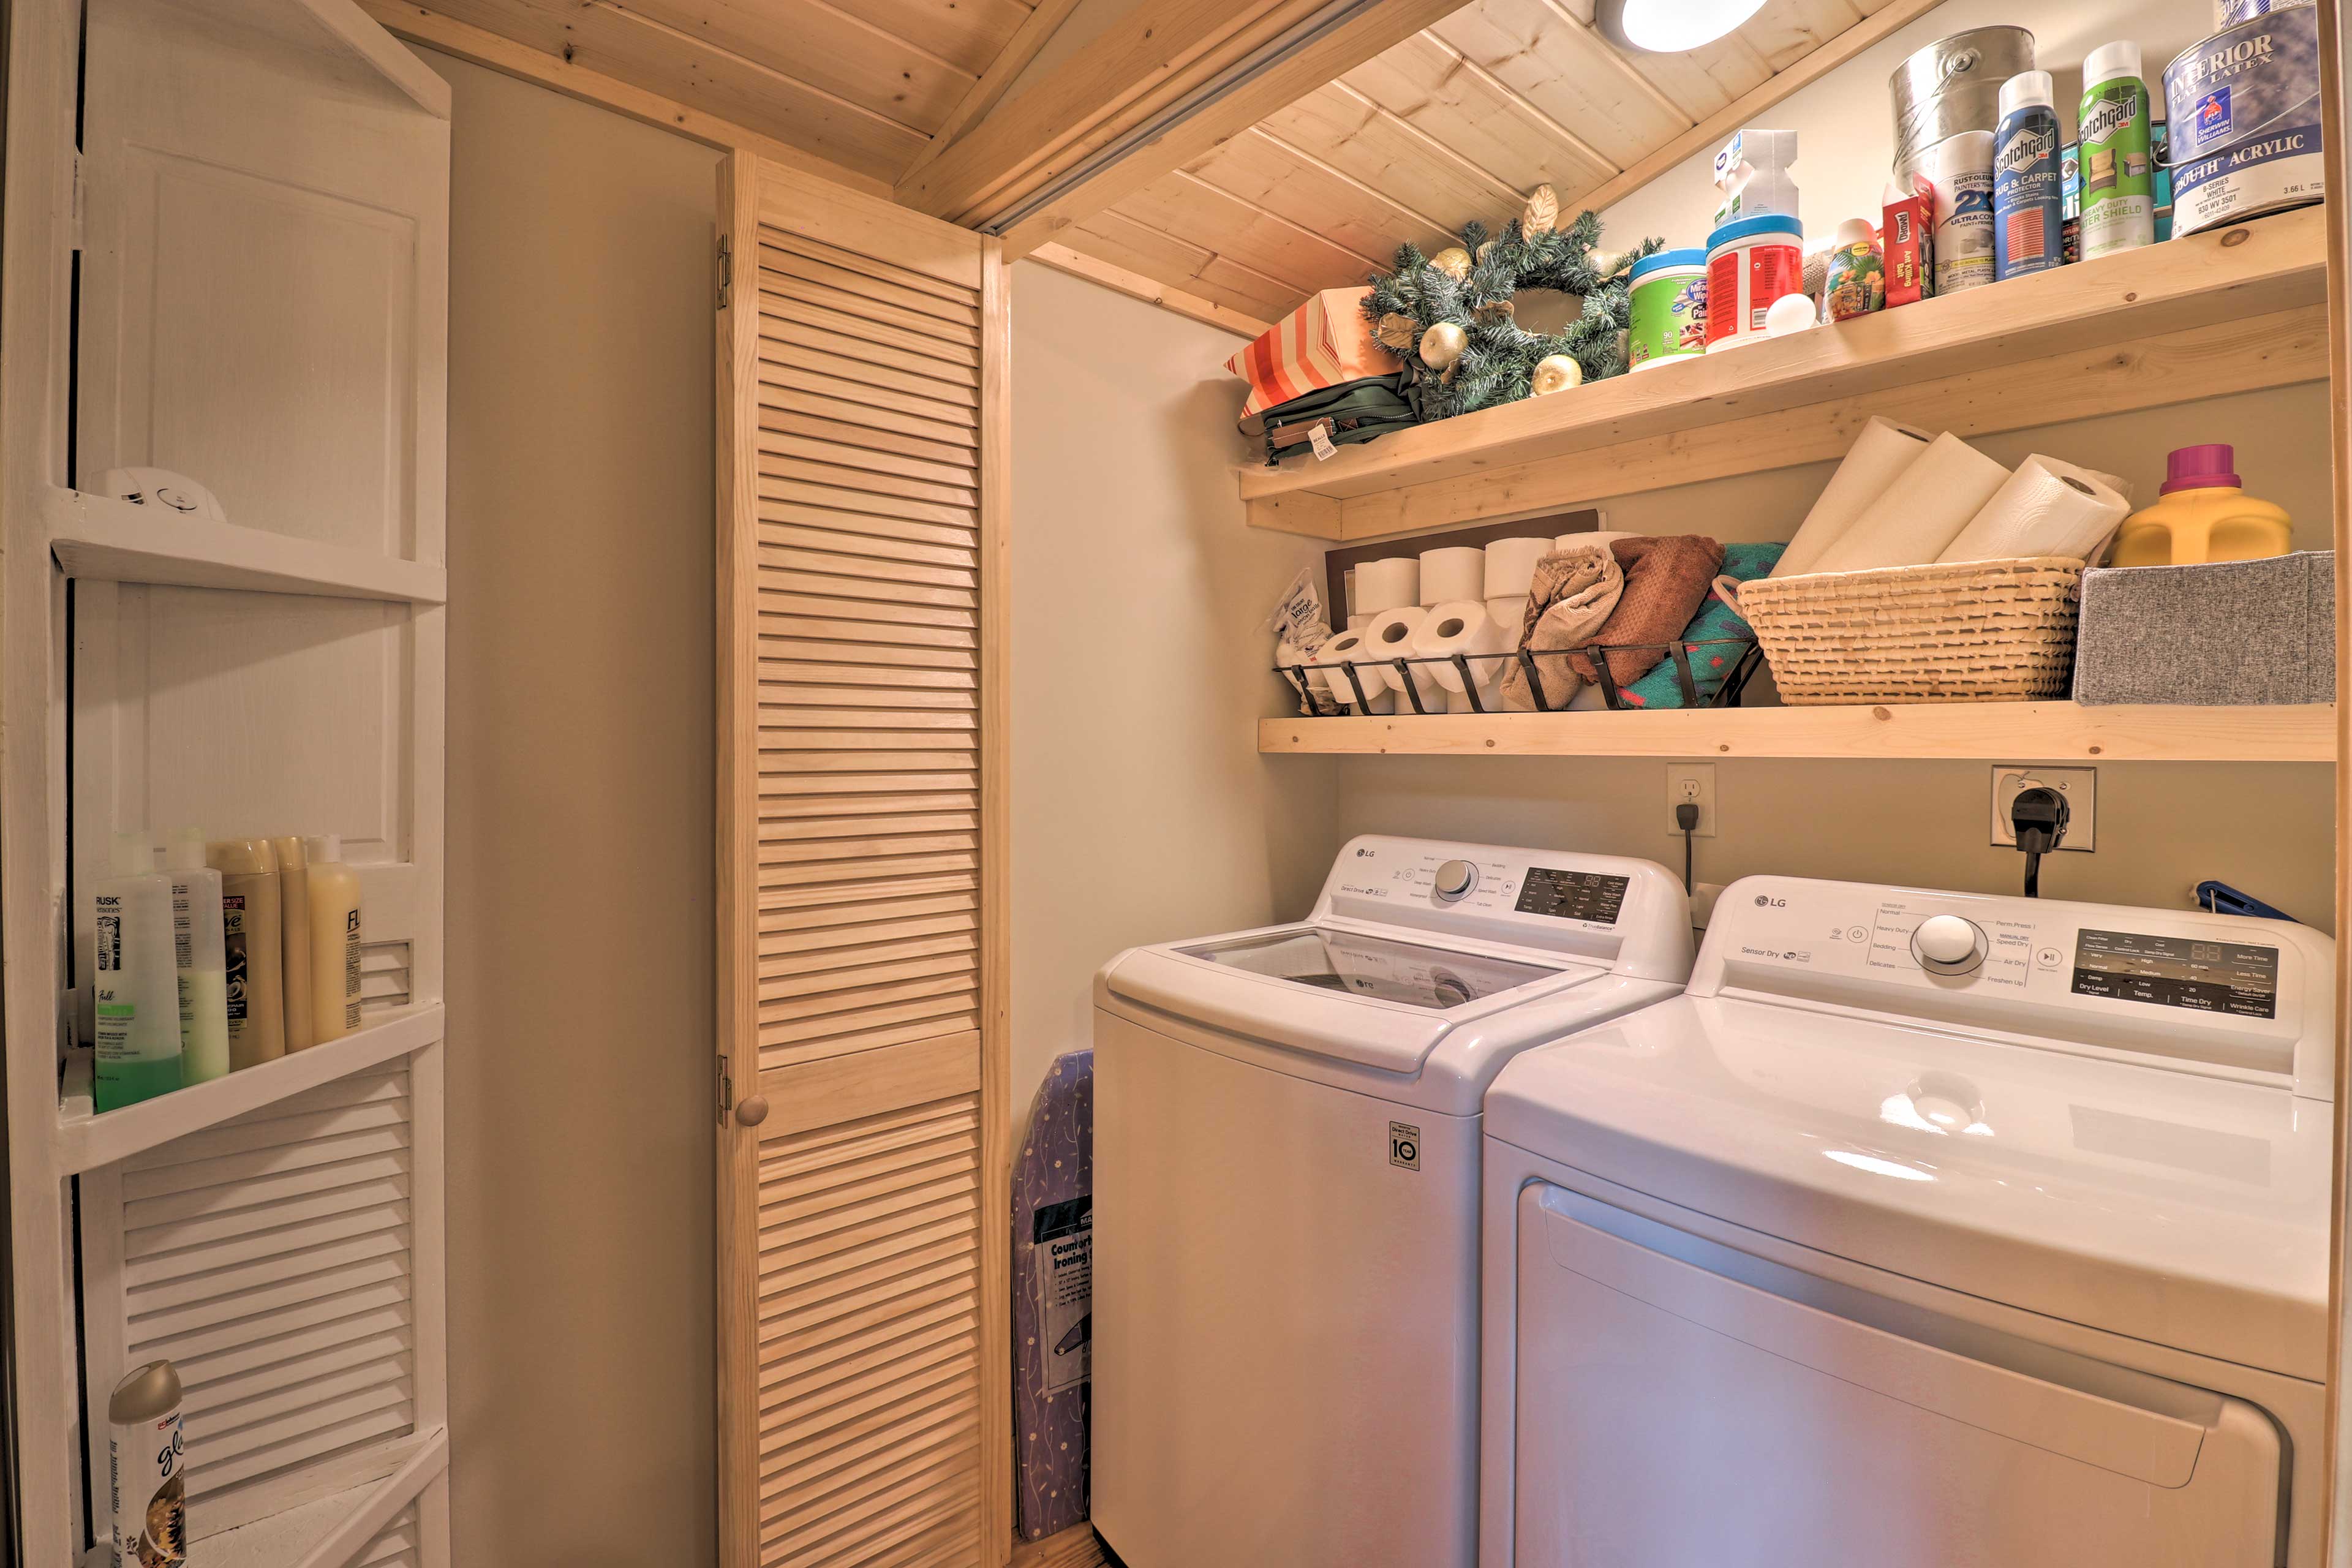 Keep your clothes fresh and clean with the cabin's washer and dryer.